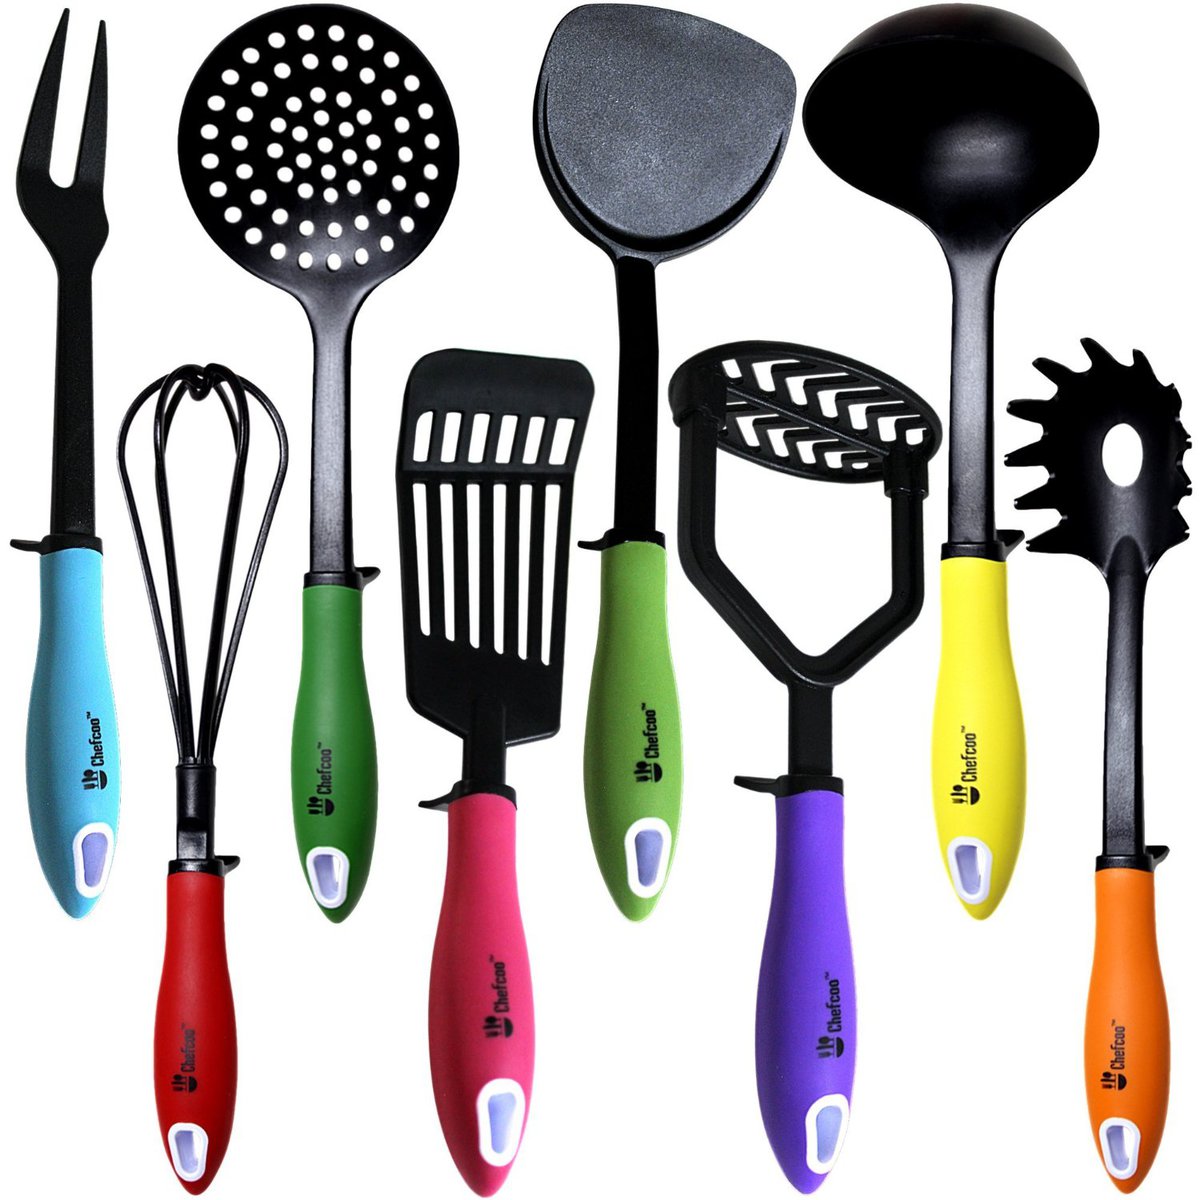 Best Kitchen Tools Great Christmas gift ideas! Lil' Luna